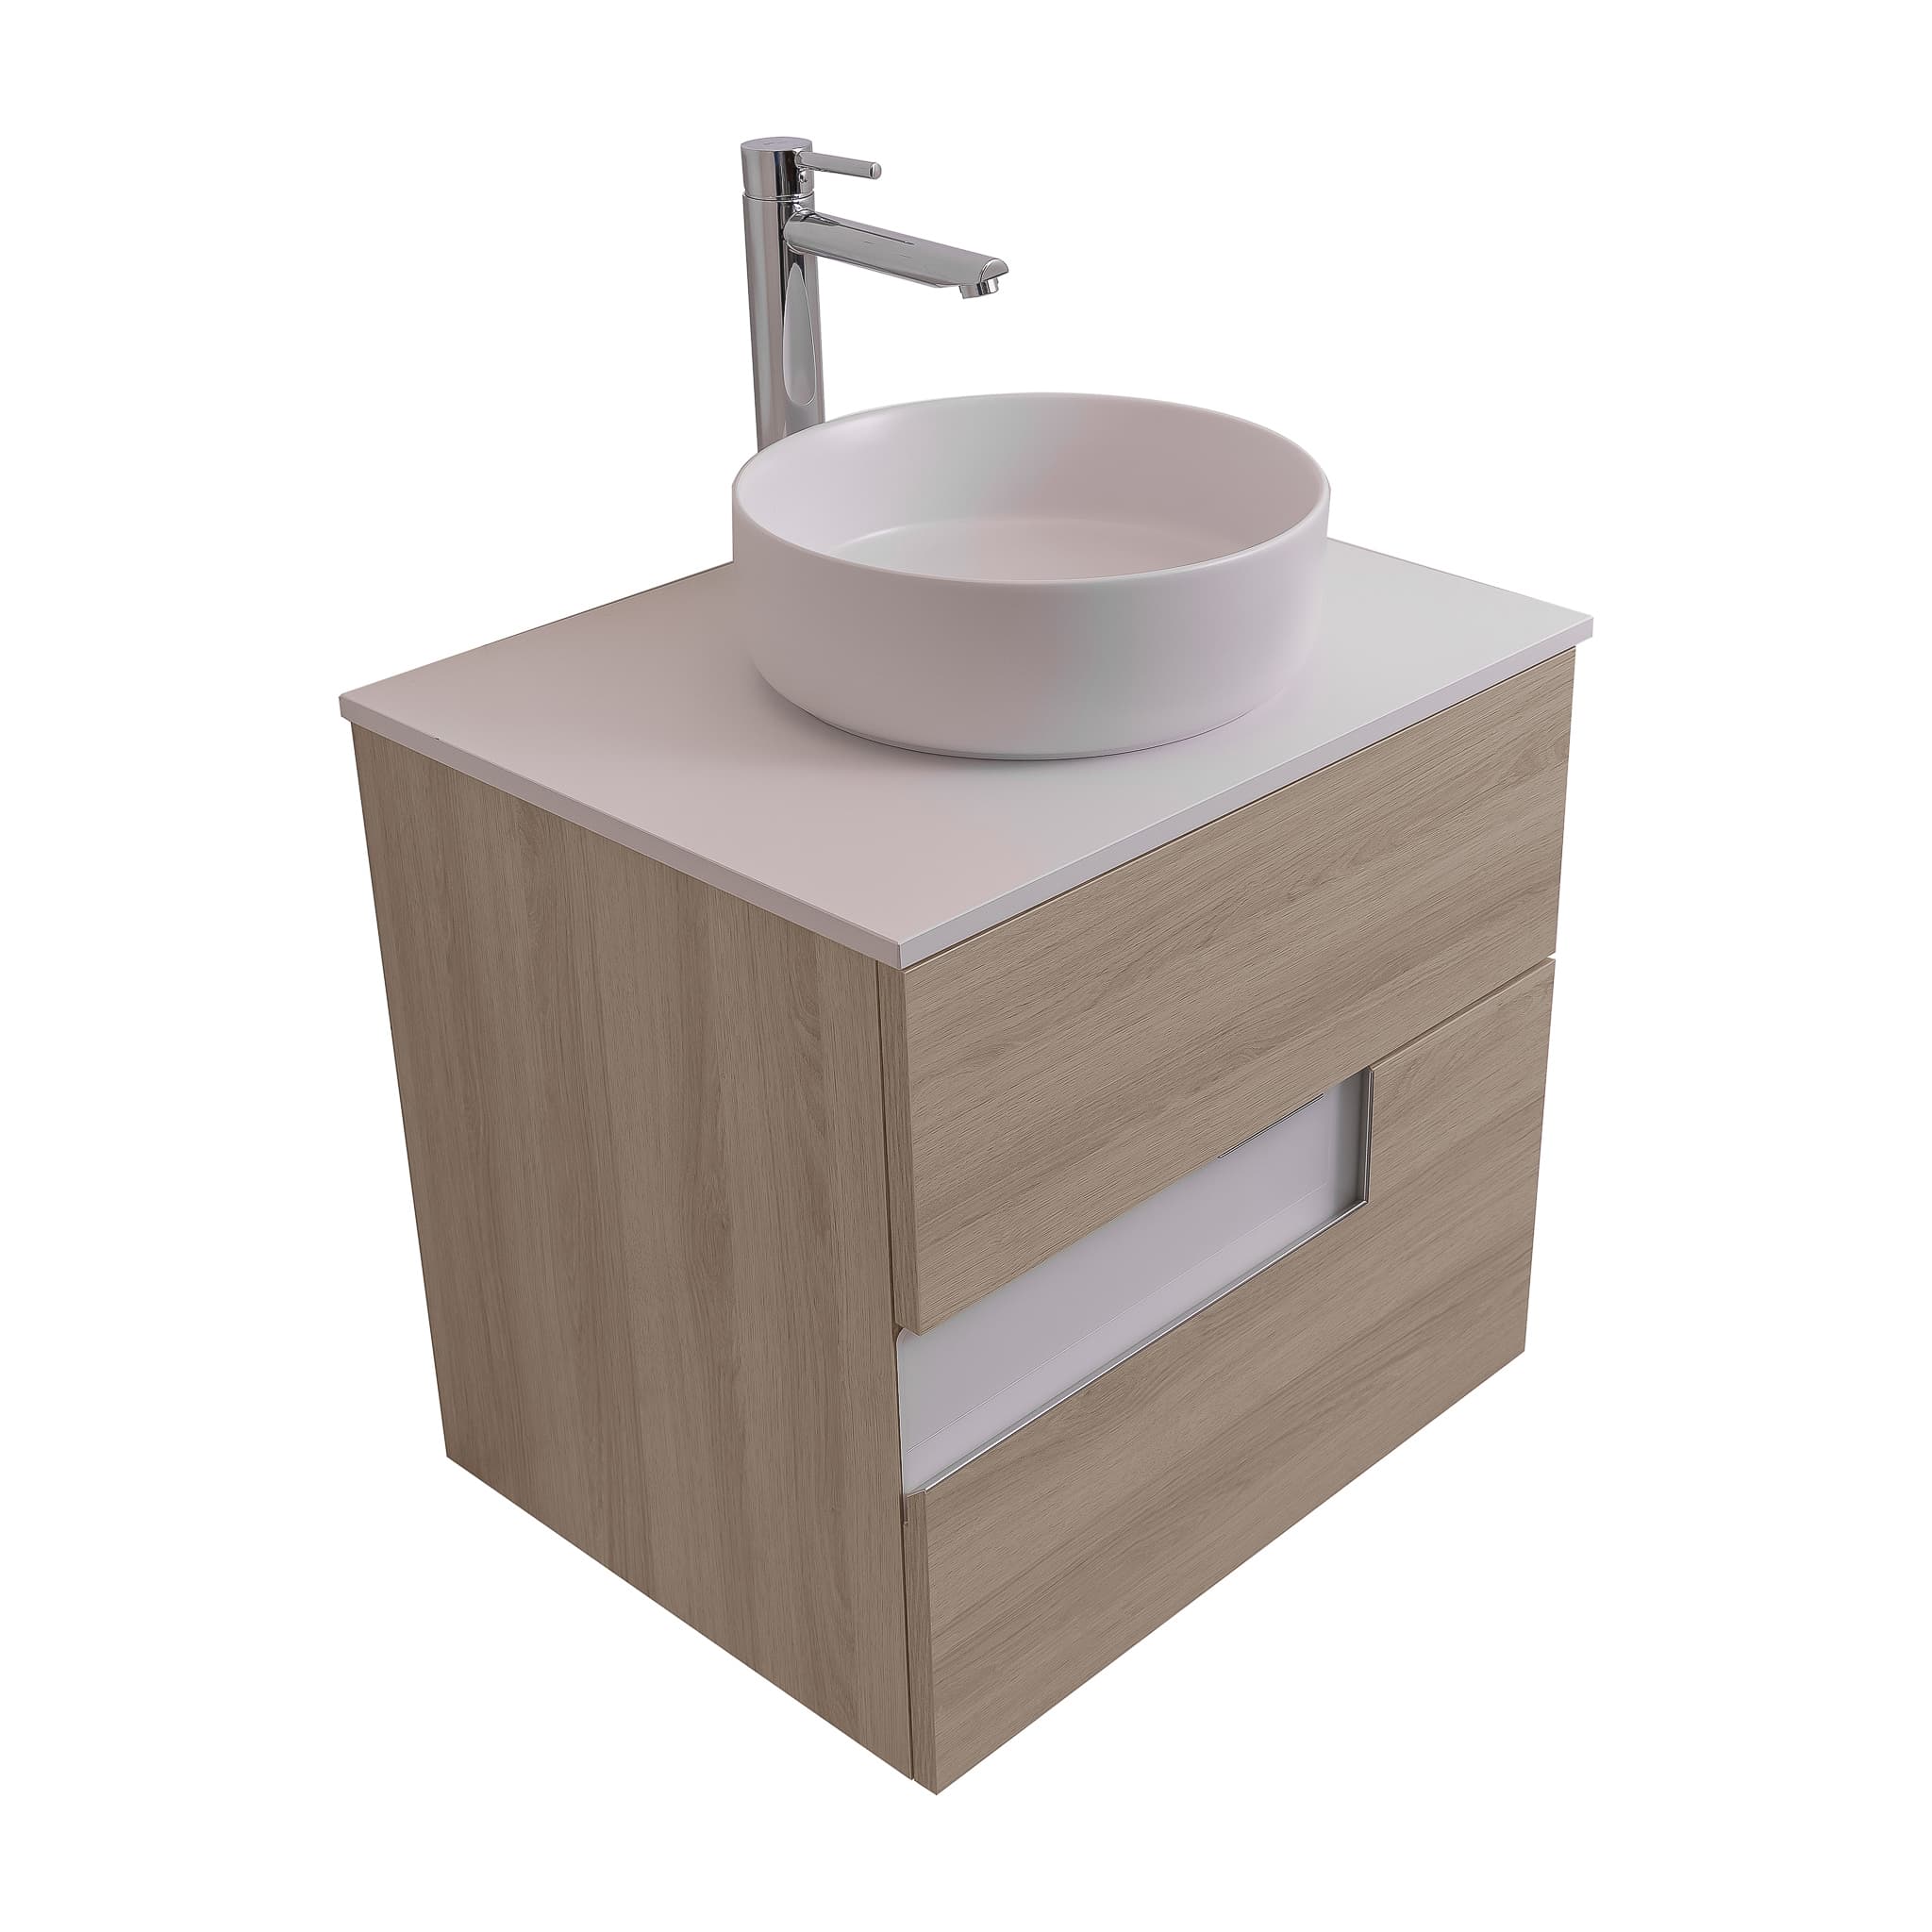 Vision 23.5 Natural Light Wood Cabinet, Ares White Top And Ares White Ceramic Basin, Wall Mounted Modern Vanity Set